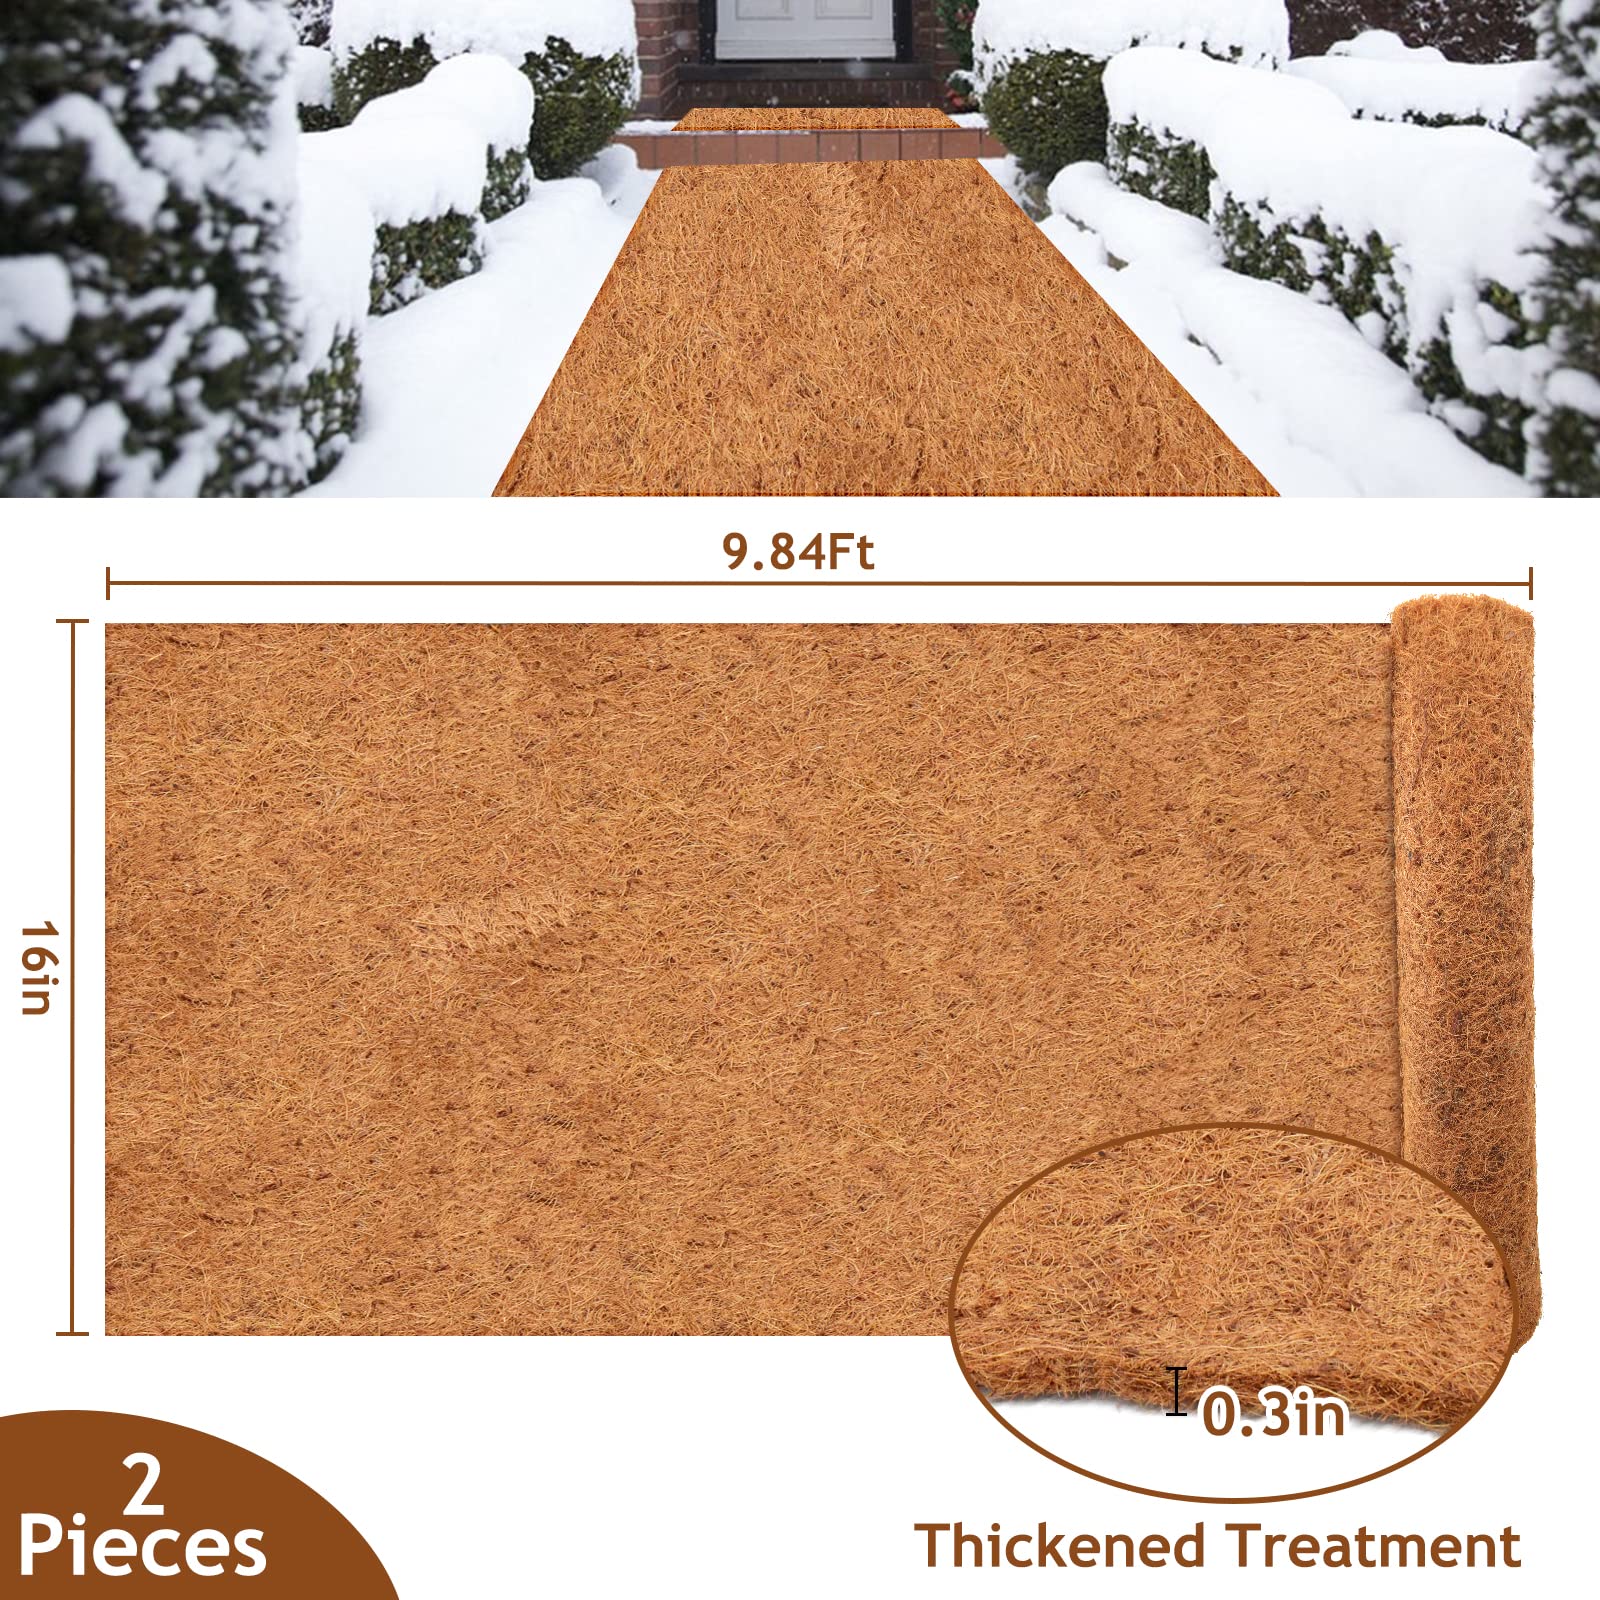 Riare 2 Pack 16 × 118 Inch No-Slip Ice and Snow Carpet Mats- Natural Coconut Fiber Carpet Anti-Slip Coco Coir Carpet Mat for Winter Walkways Front Door Stairs Porch Outdoor Garden Patio Safe Walking